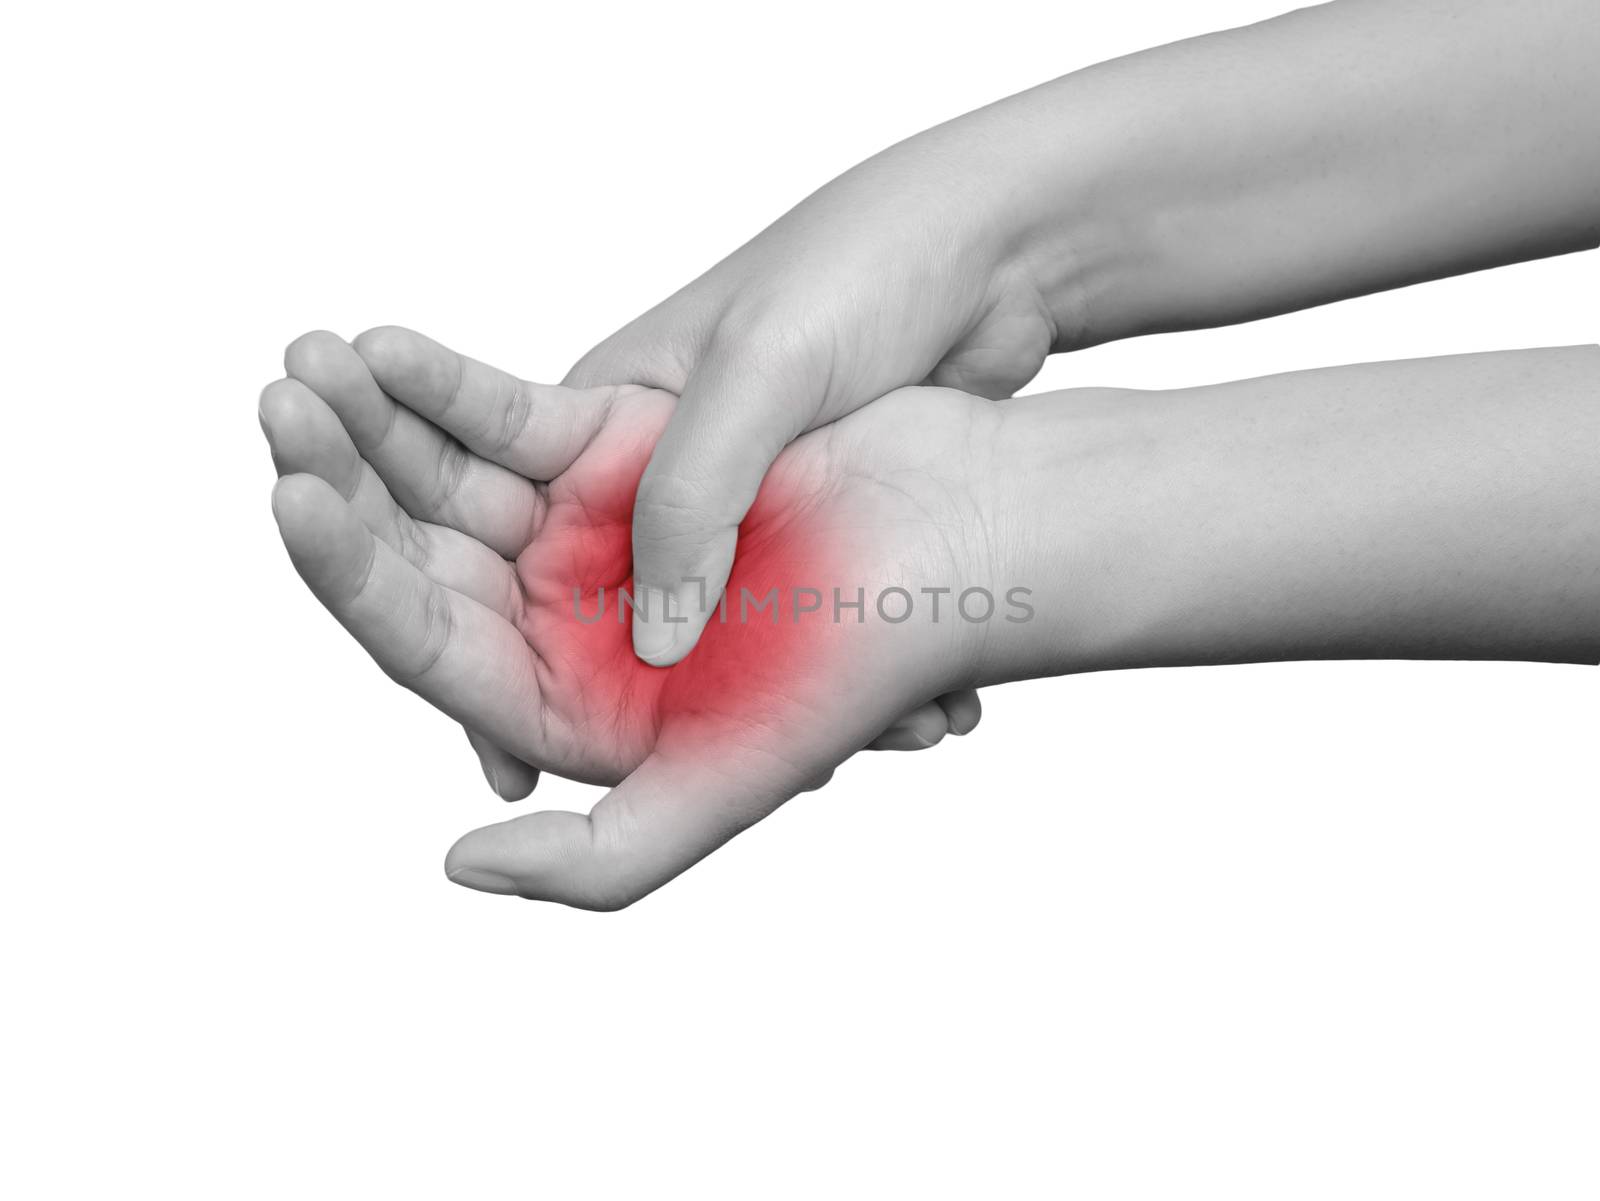 woman suffering from pain in hand. mono tone highlight at hand isolated on white background. health care and medical concept by asiandelight